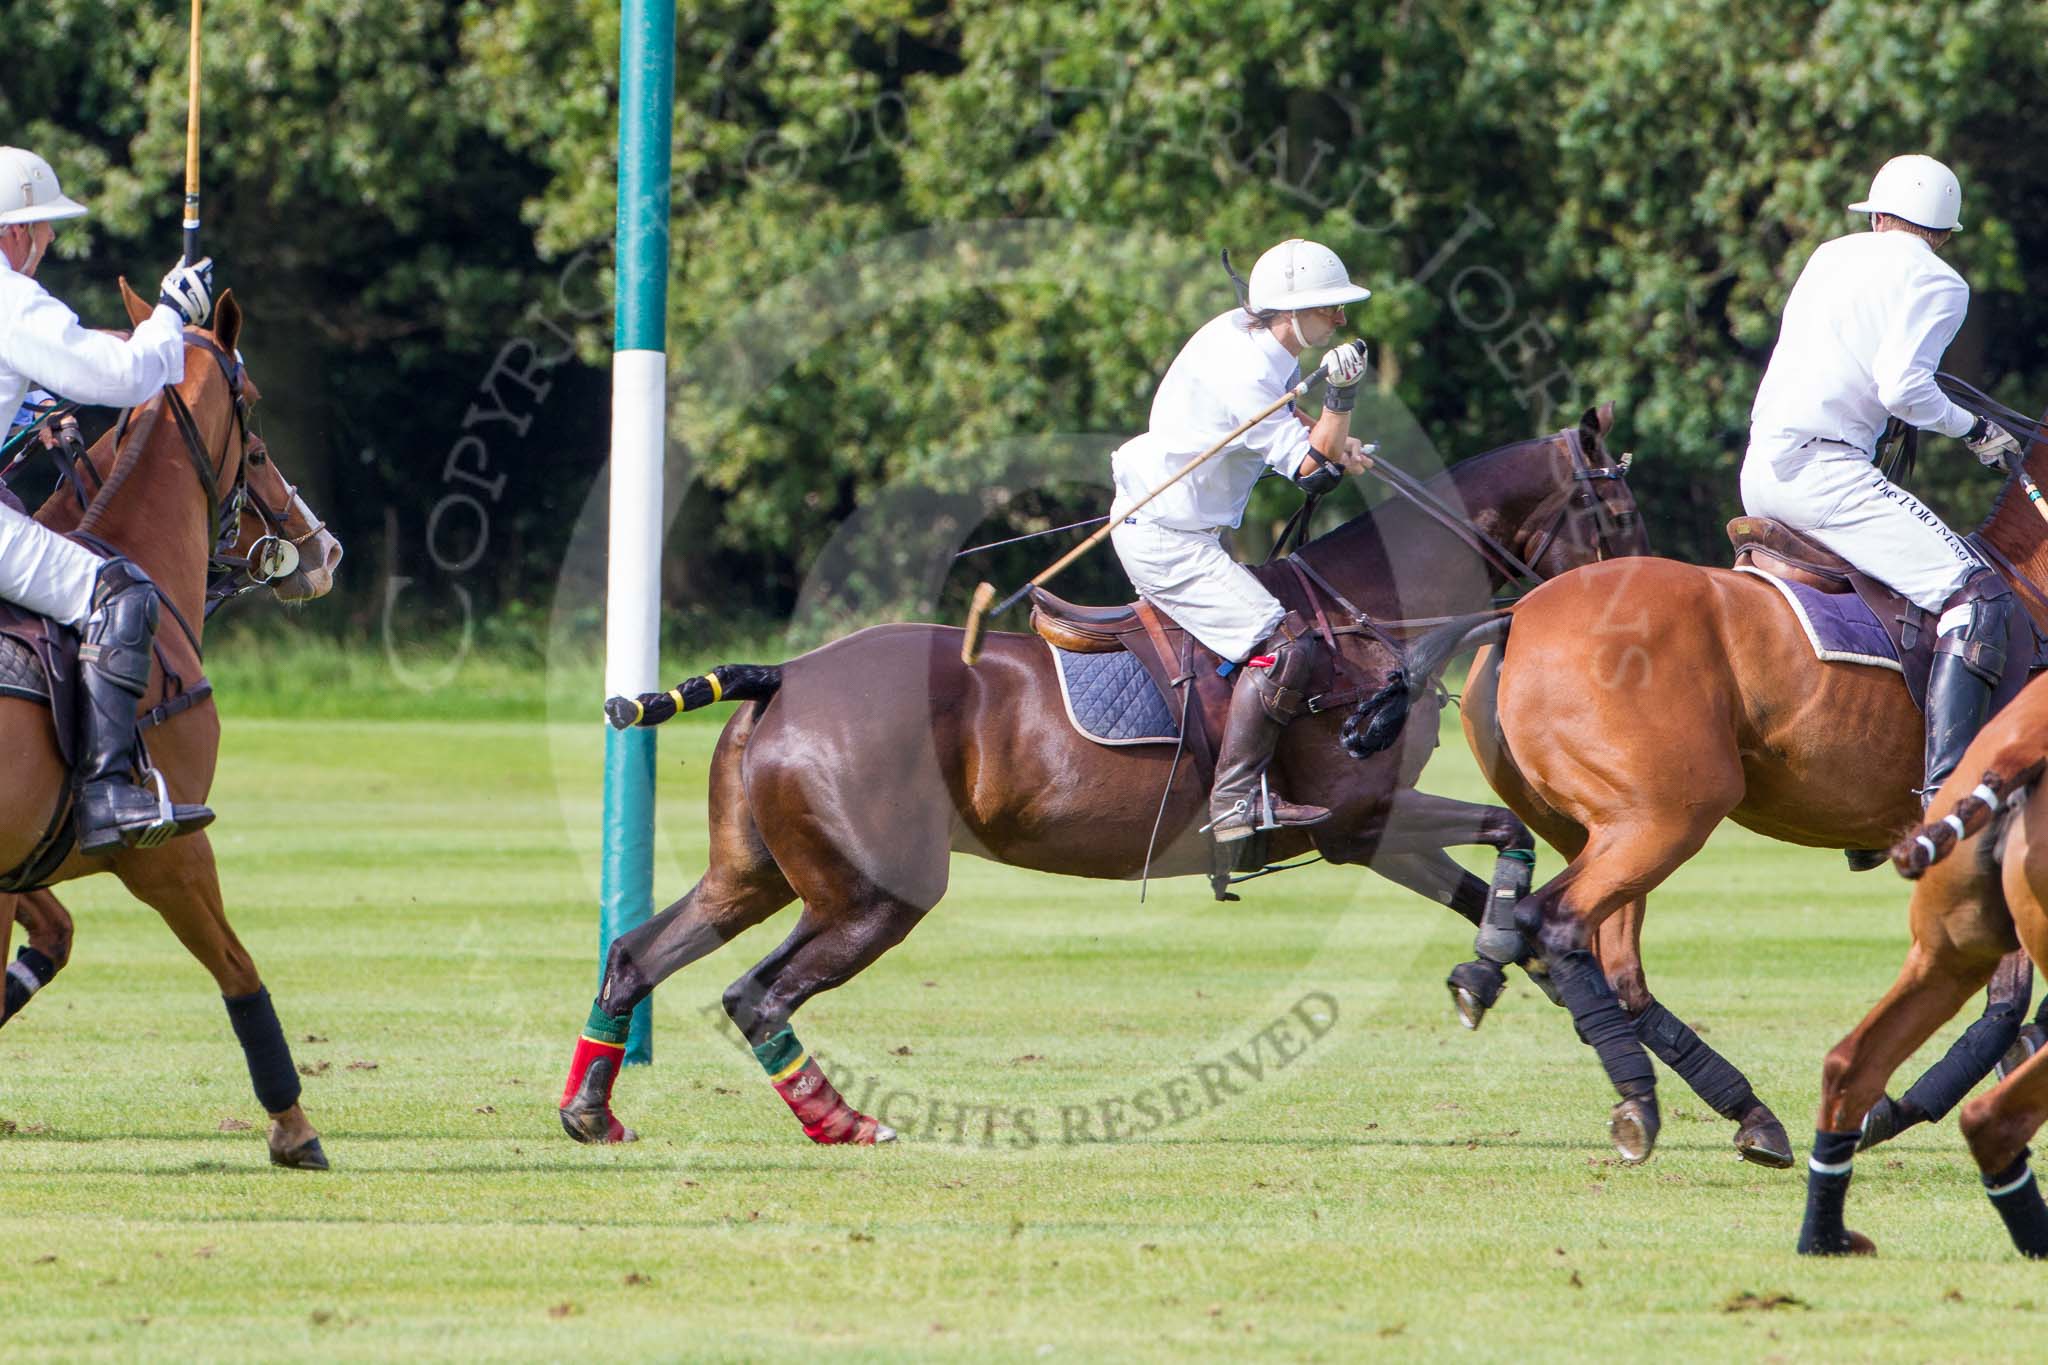 7th Heritage Polo Cup semi-finals: La Golondrina Argentina Pepe Riglos (6)..
Hurtwood Park Polo Club,
Ewhurst Green,
Surrey,
United Kingdom,
on 04 August 2012 at 16:49, image #330